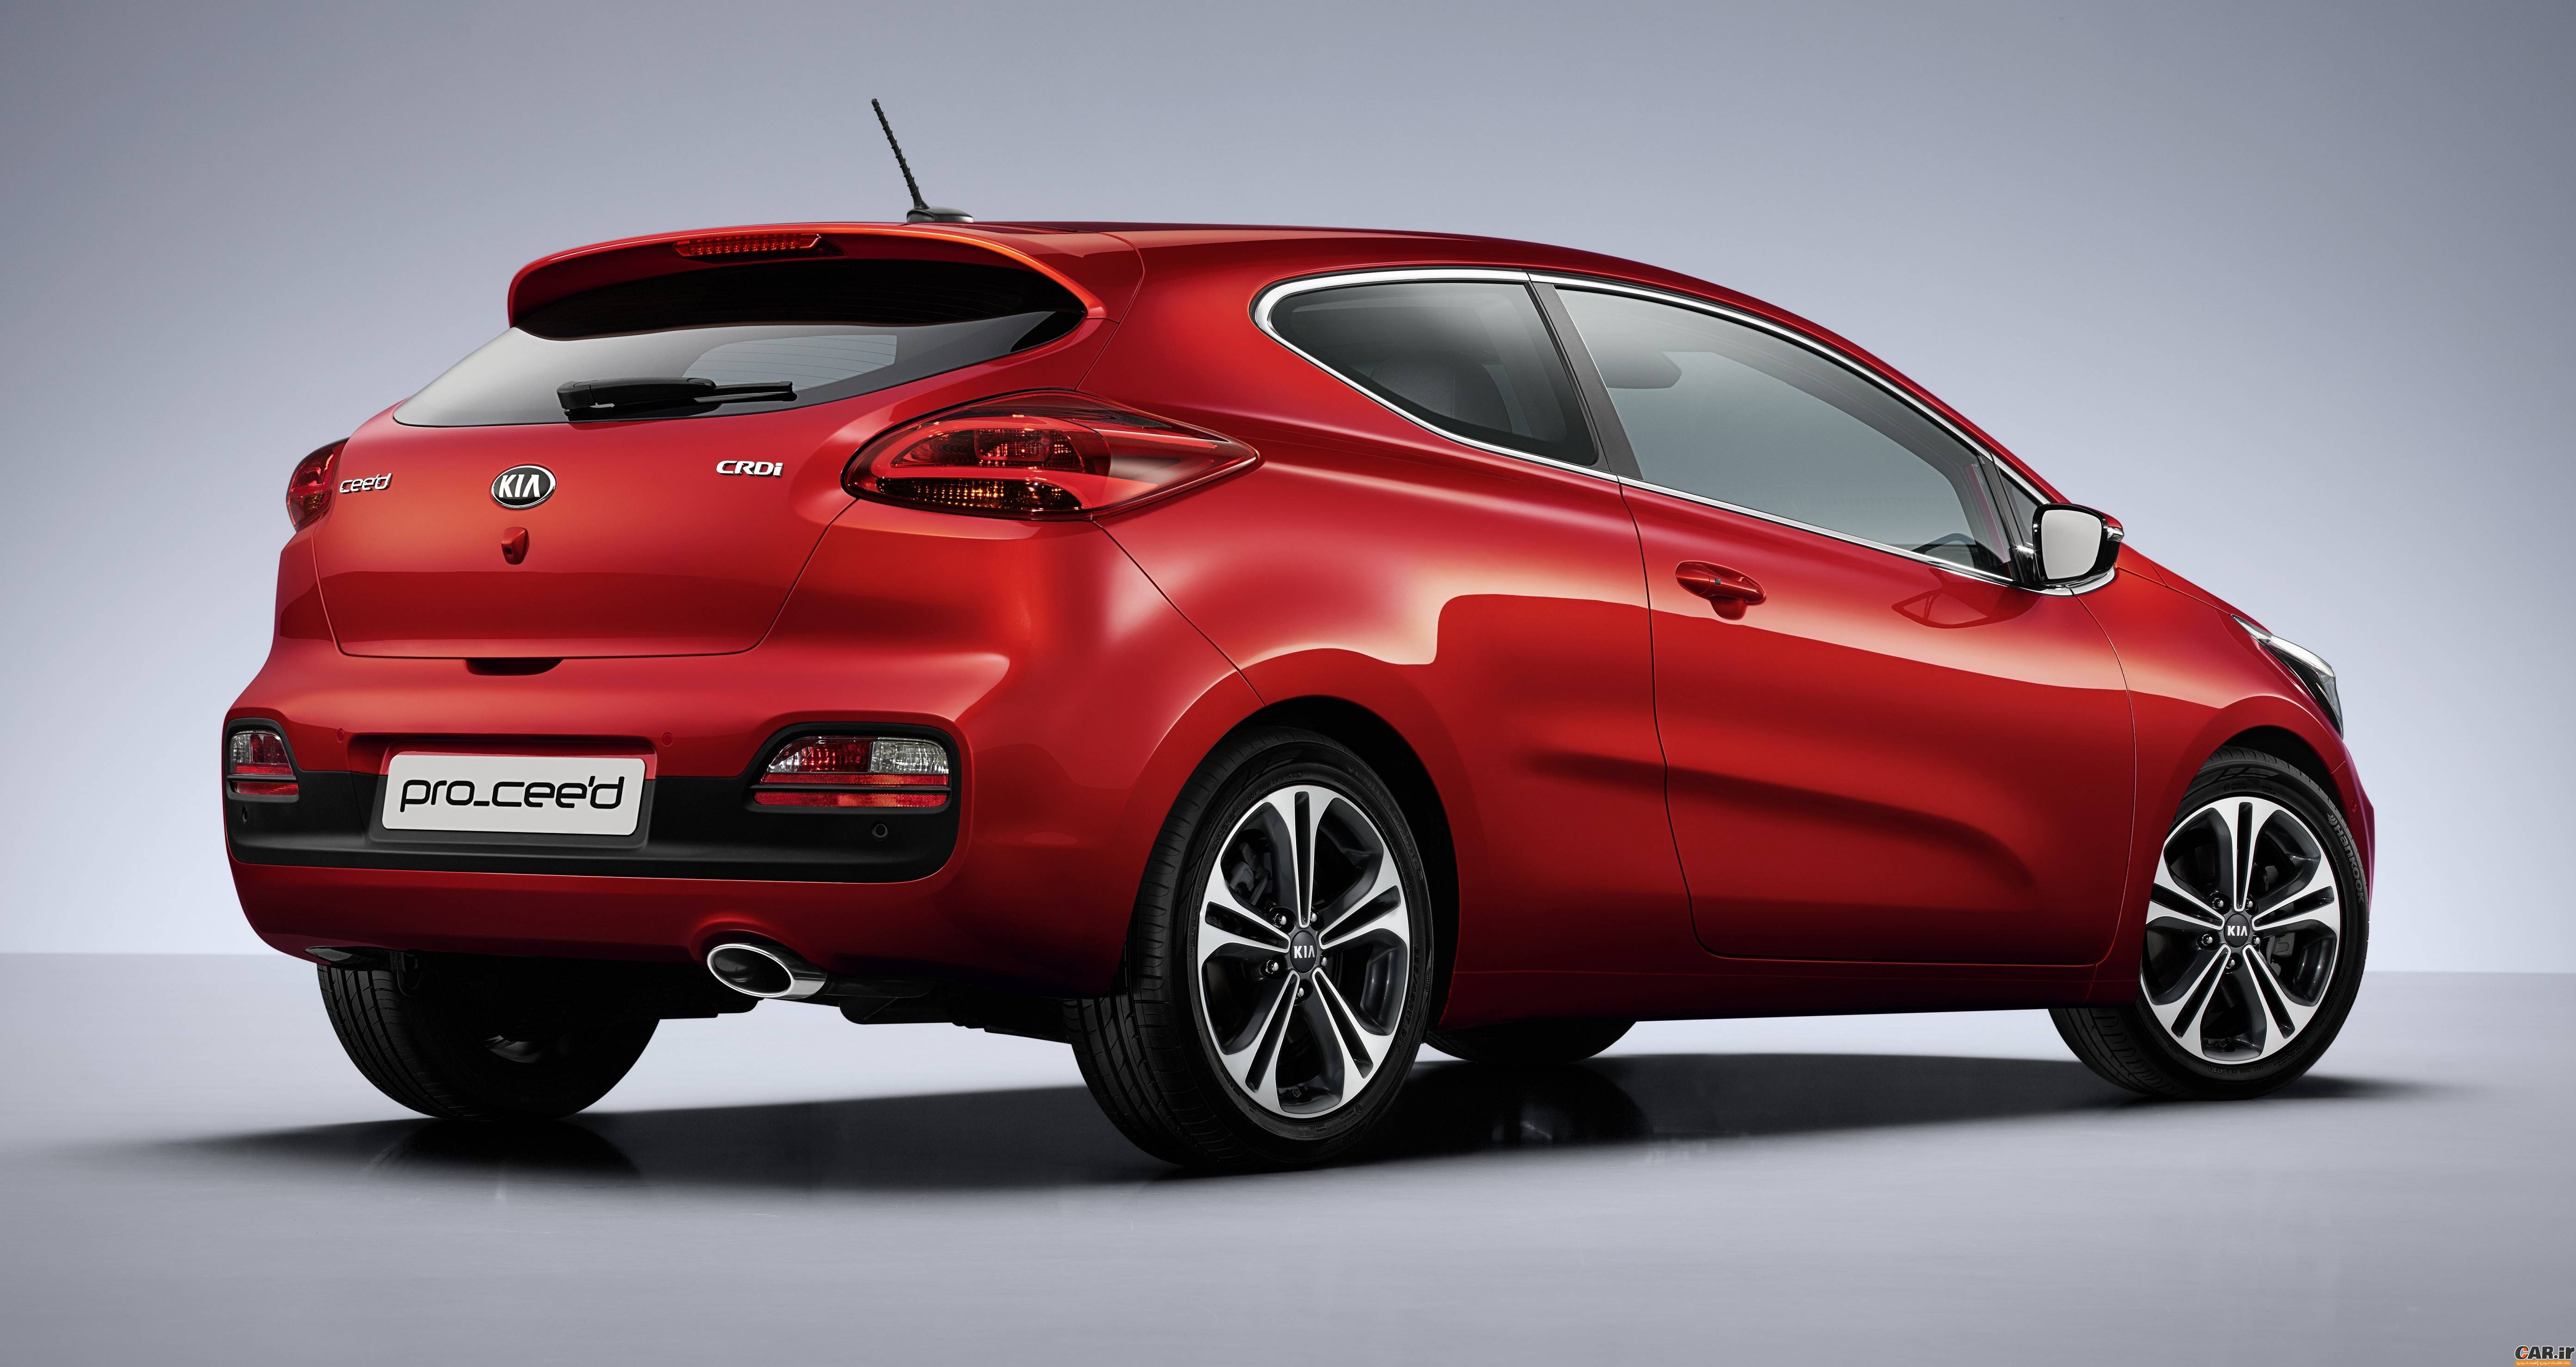 Geely Emgrand 7 (EC7) exterior specifications